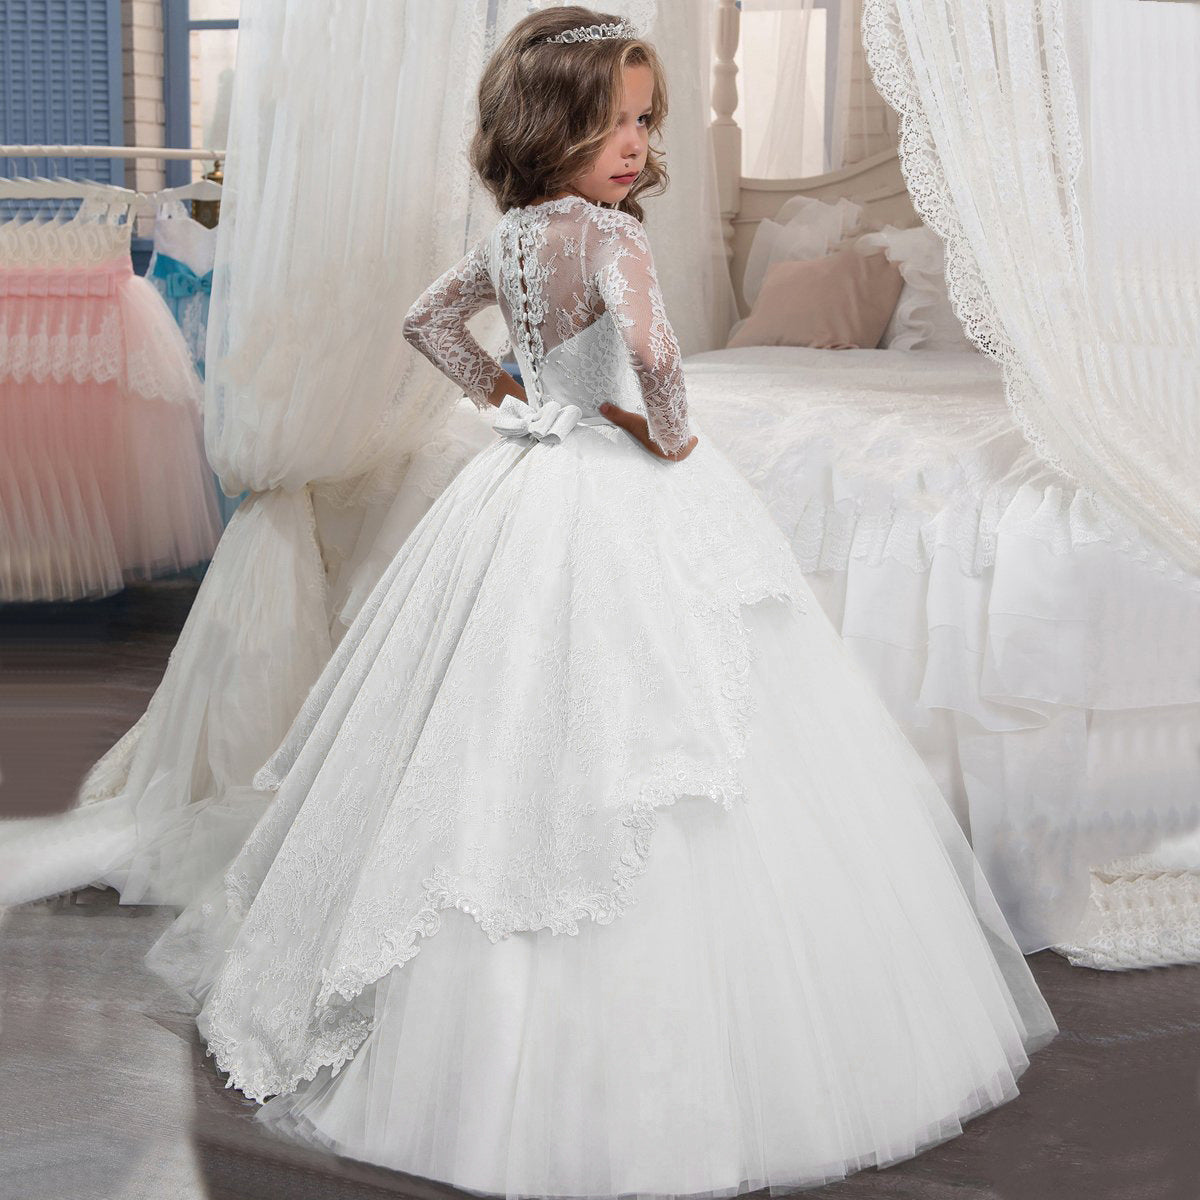 White Lace First Holy First Communion Dress Clearance With Cap Sleeves And  Crystal Flower Design For Girls Pageants Modern Arabic Style At An  Affordable Price 2954 From Ffre66, $43.87 | DHgate.Com